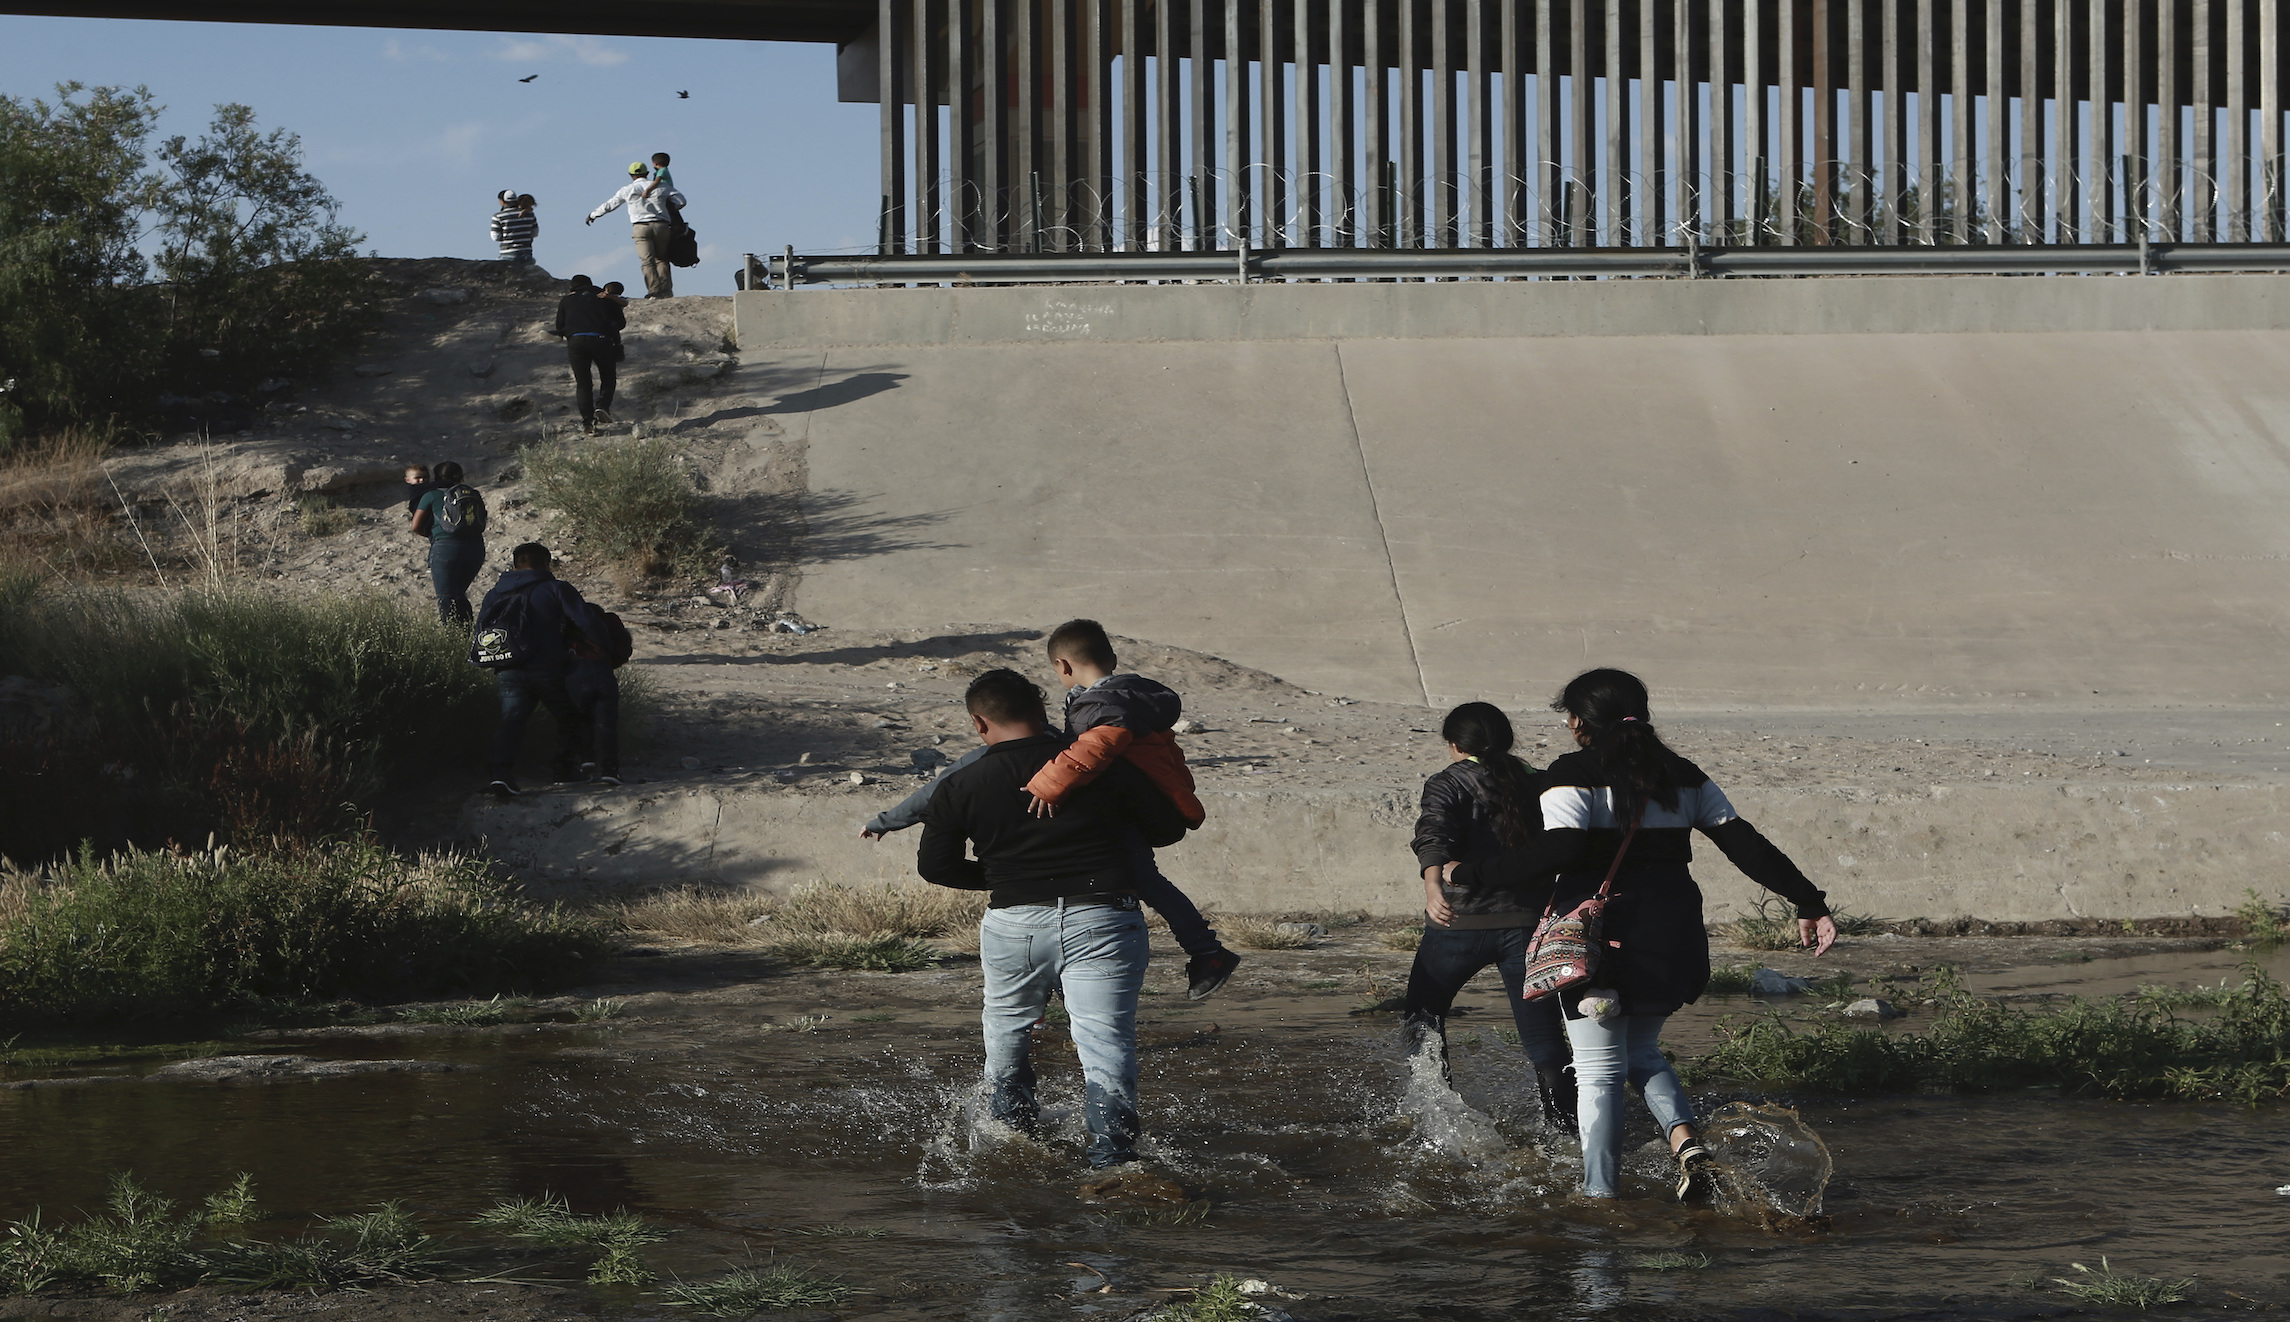 Most illegal crossings in 12 years: Border Patrol took 851,000 into custody during fiscal 2019 - Washington Examiner